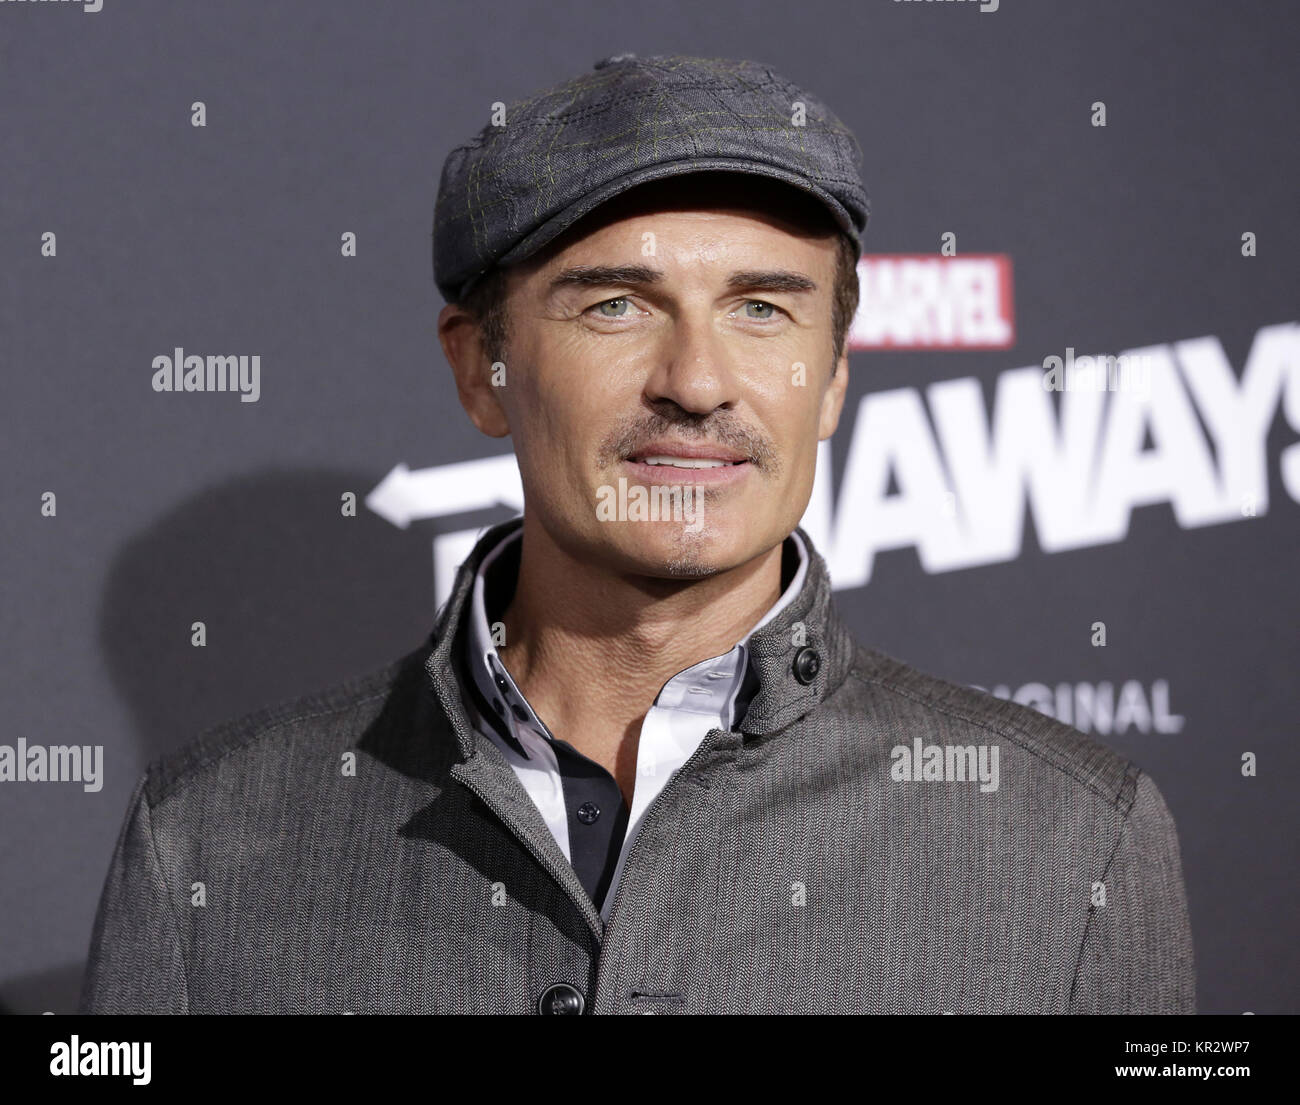 Celebrities attend  'Runaways' film premiere at Regency Bruin Theatre in Westwood.  Featuring: Julian McMahon Where: Los Angeles, California, United States When: 17 Nov 2017 Credit: Brian To/WENN.com Stock Photo